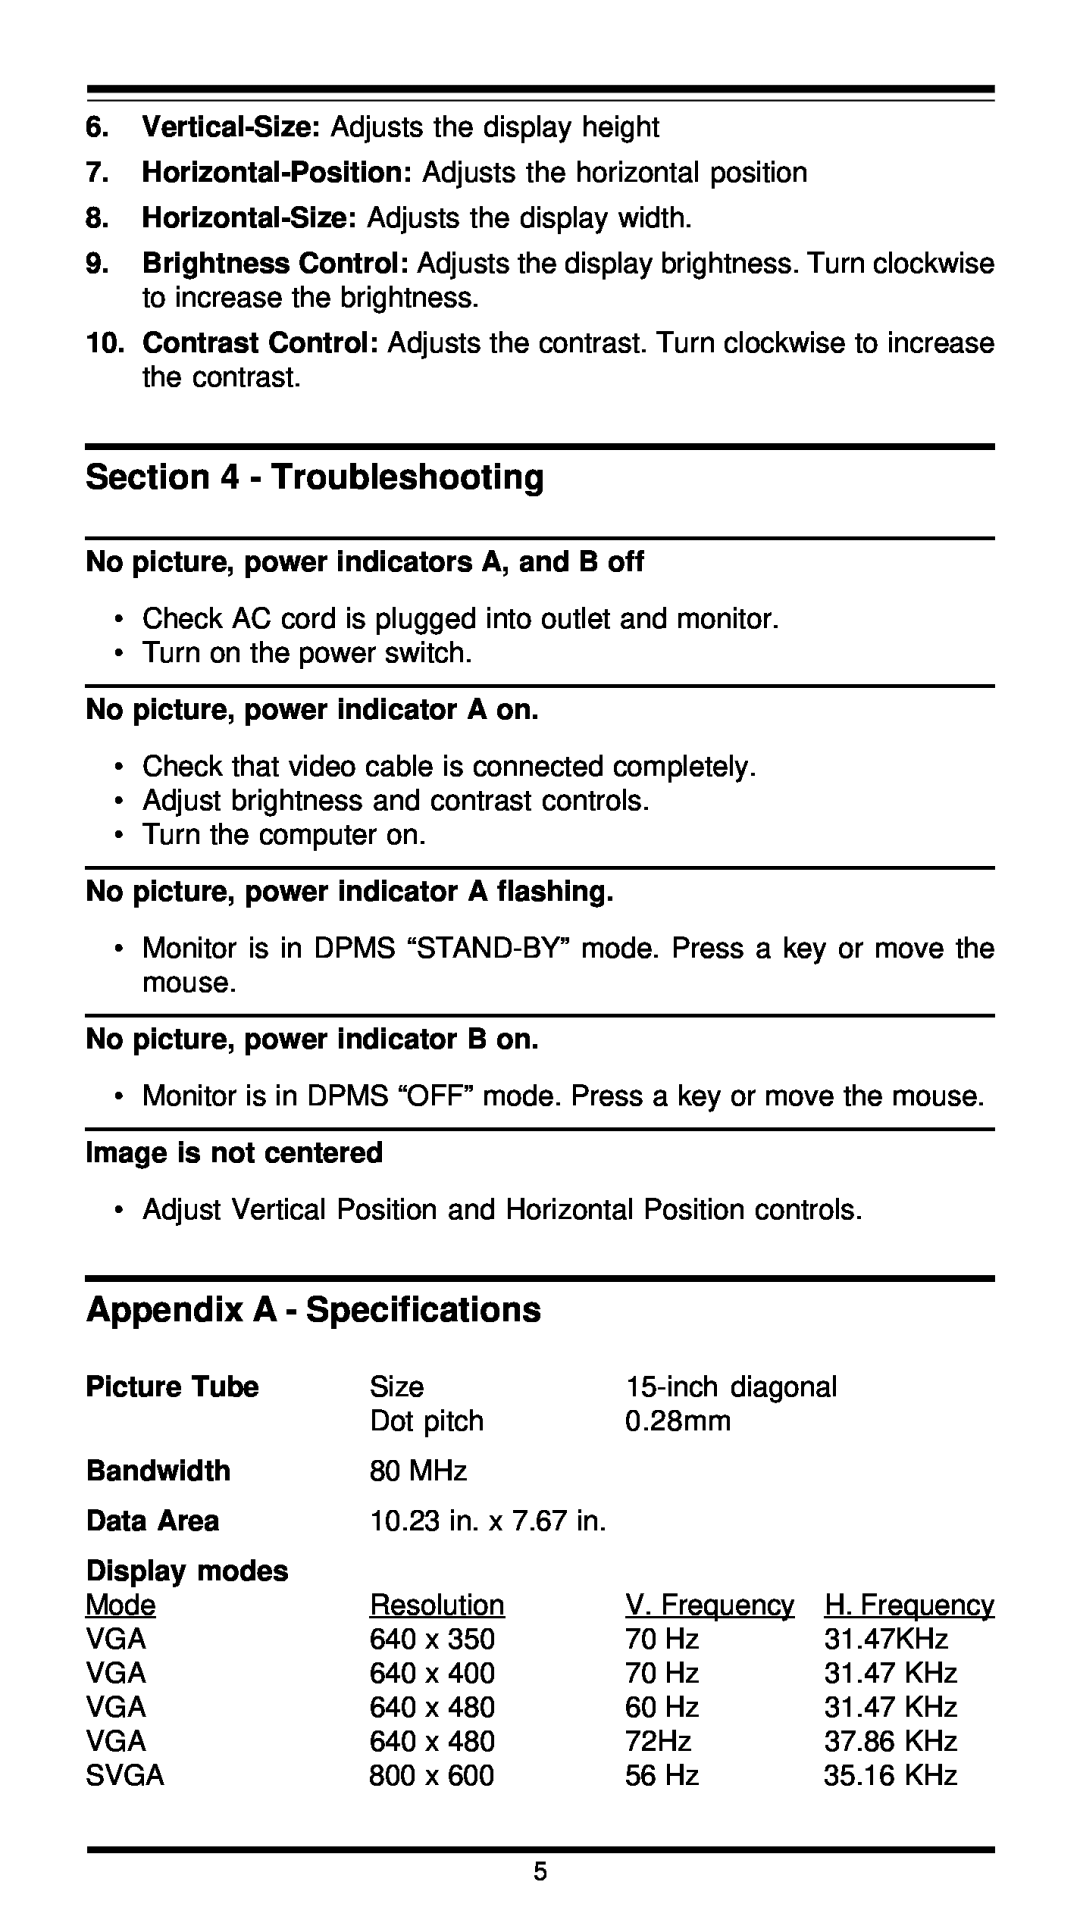 MaxTech XT5861 Troubleshooting, Appendix A - Specifications, No picture, power indicators A, and B off, Picture Tube 